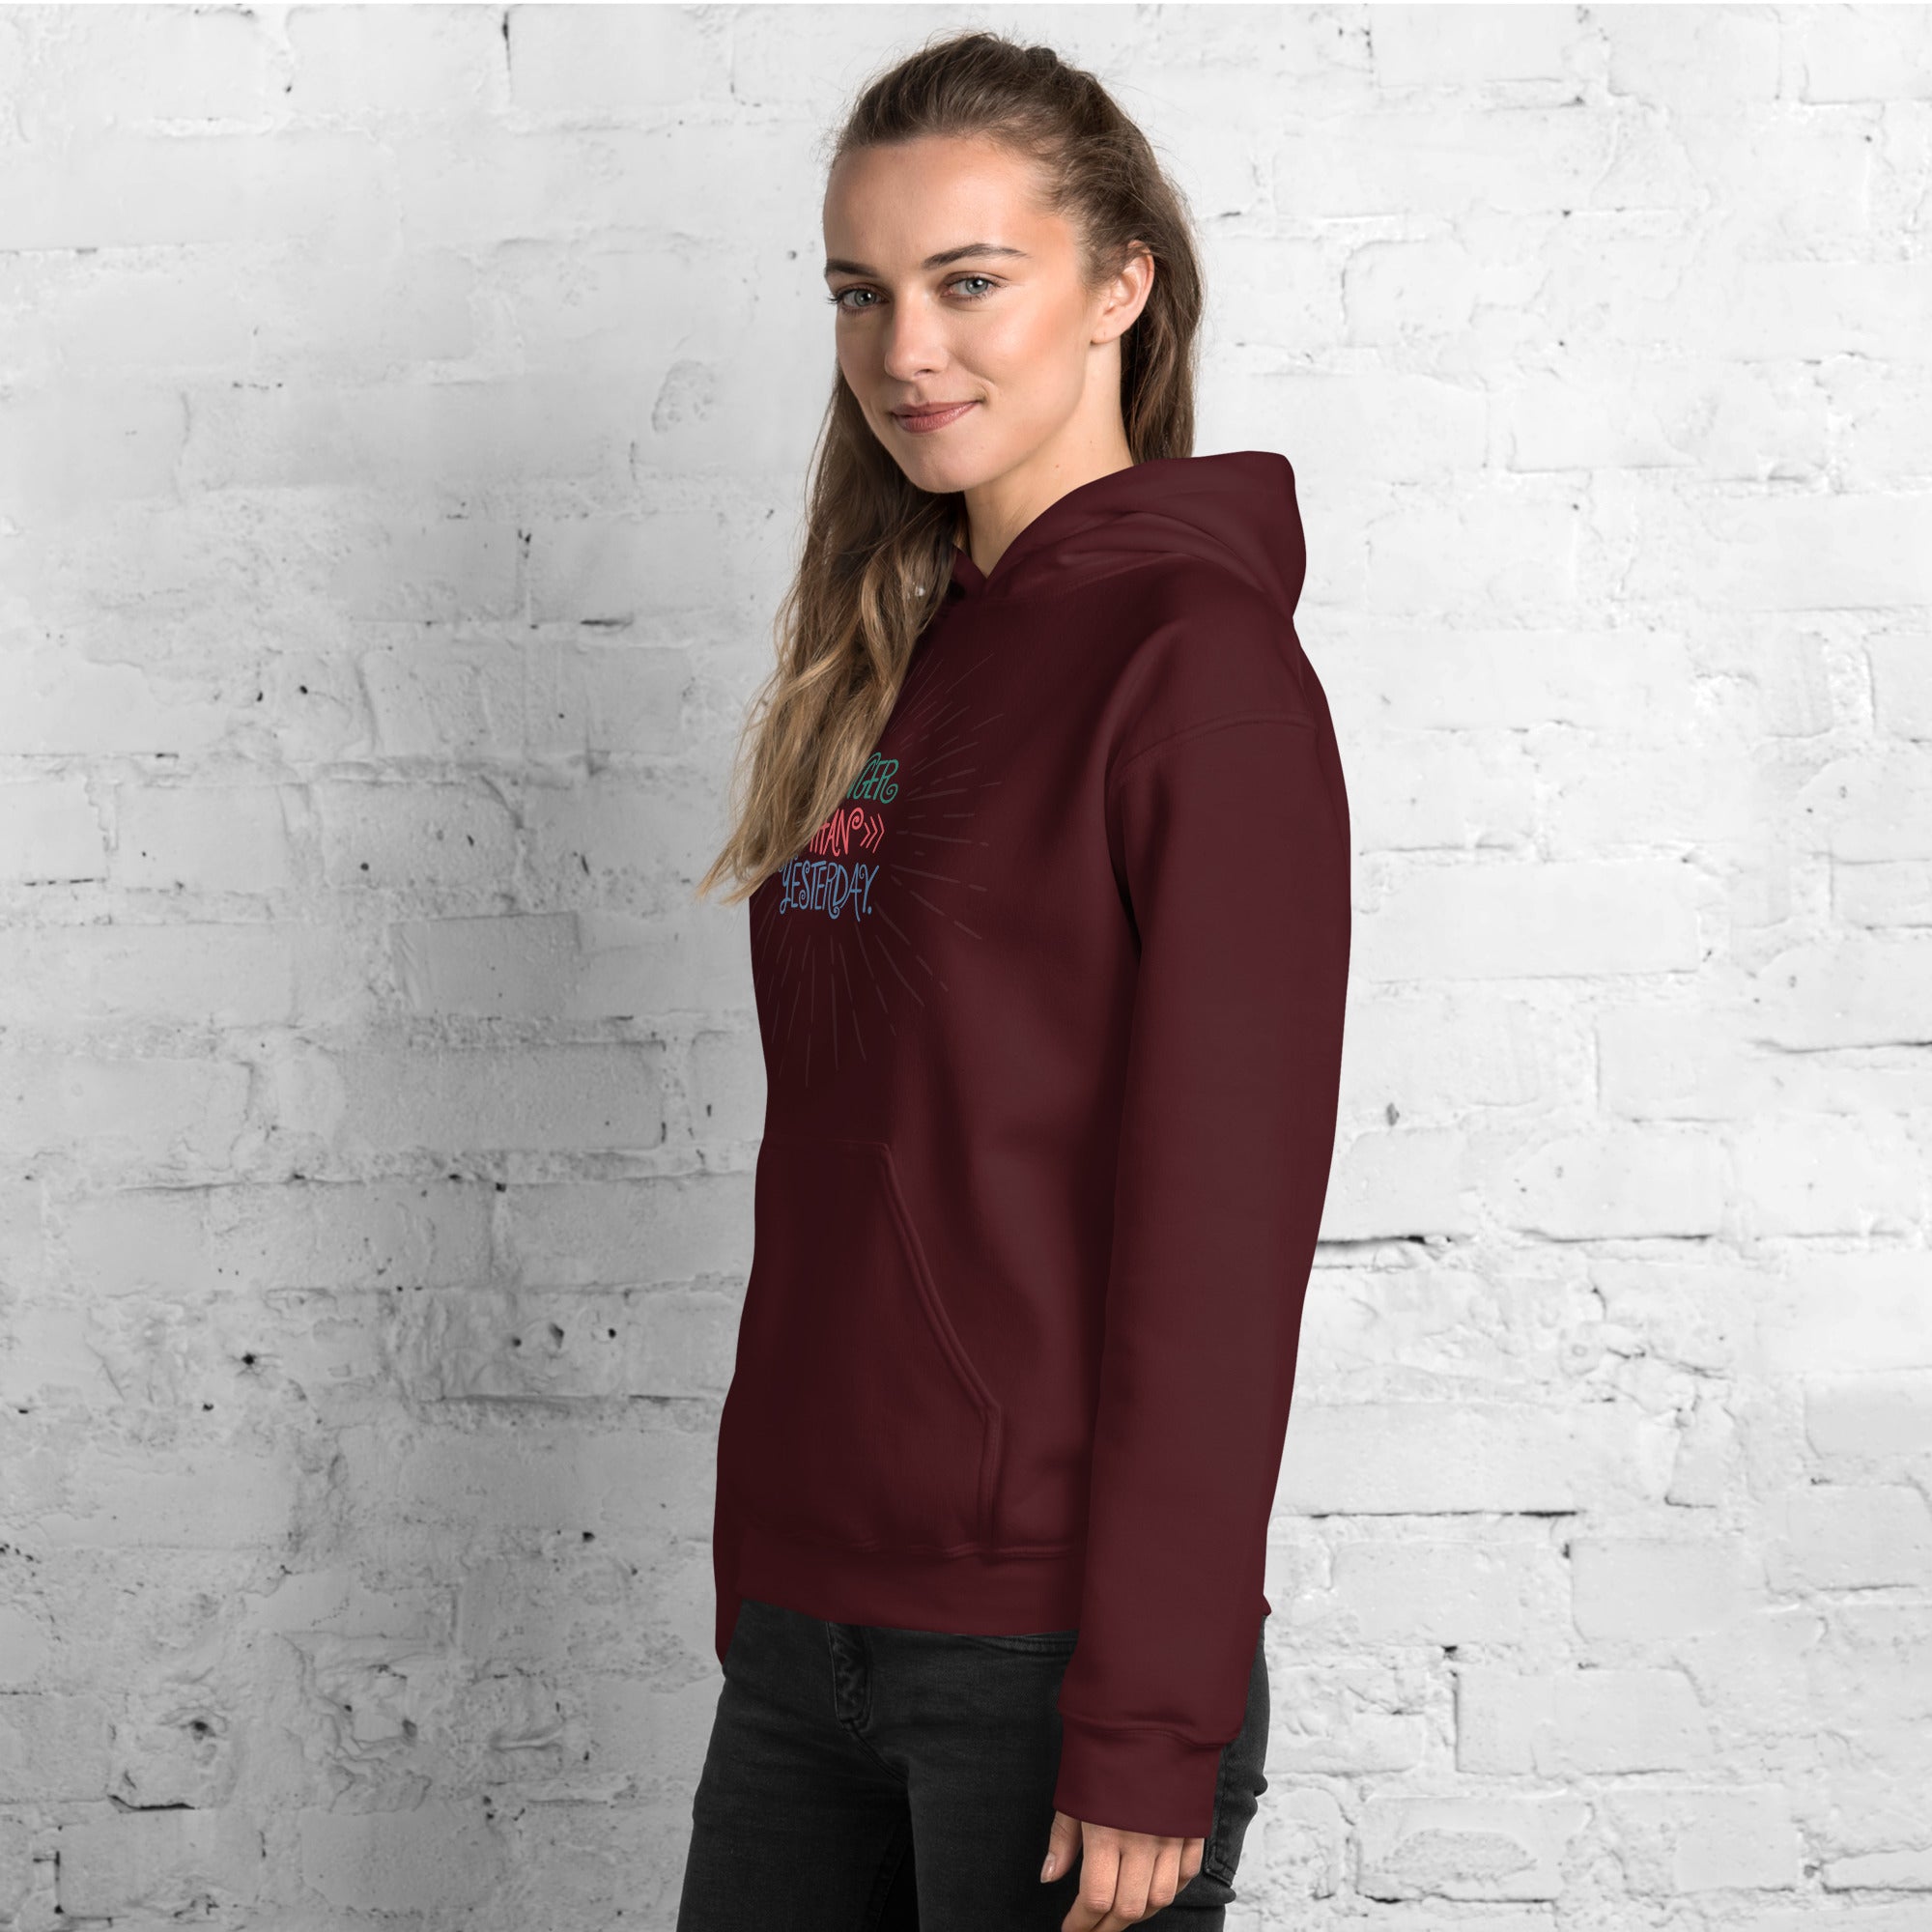 Stronger Than Yesterday Hoodie for Women